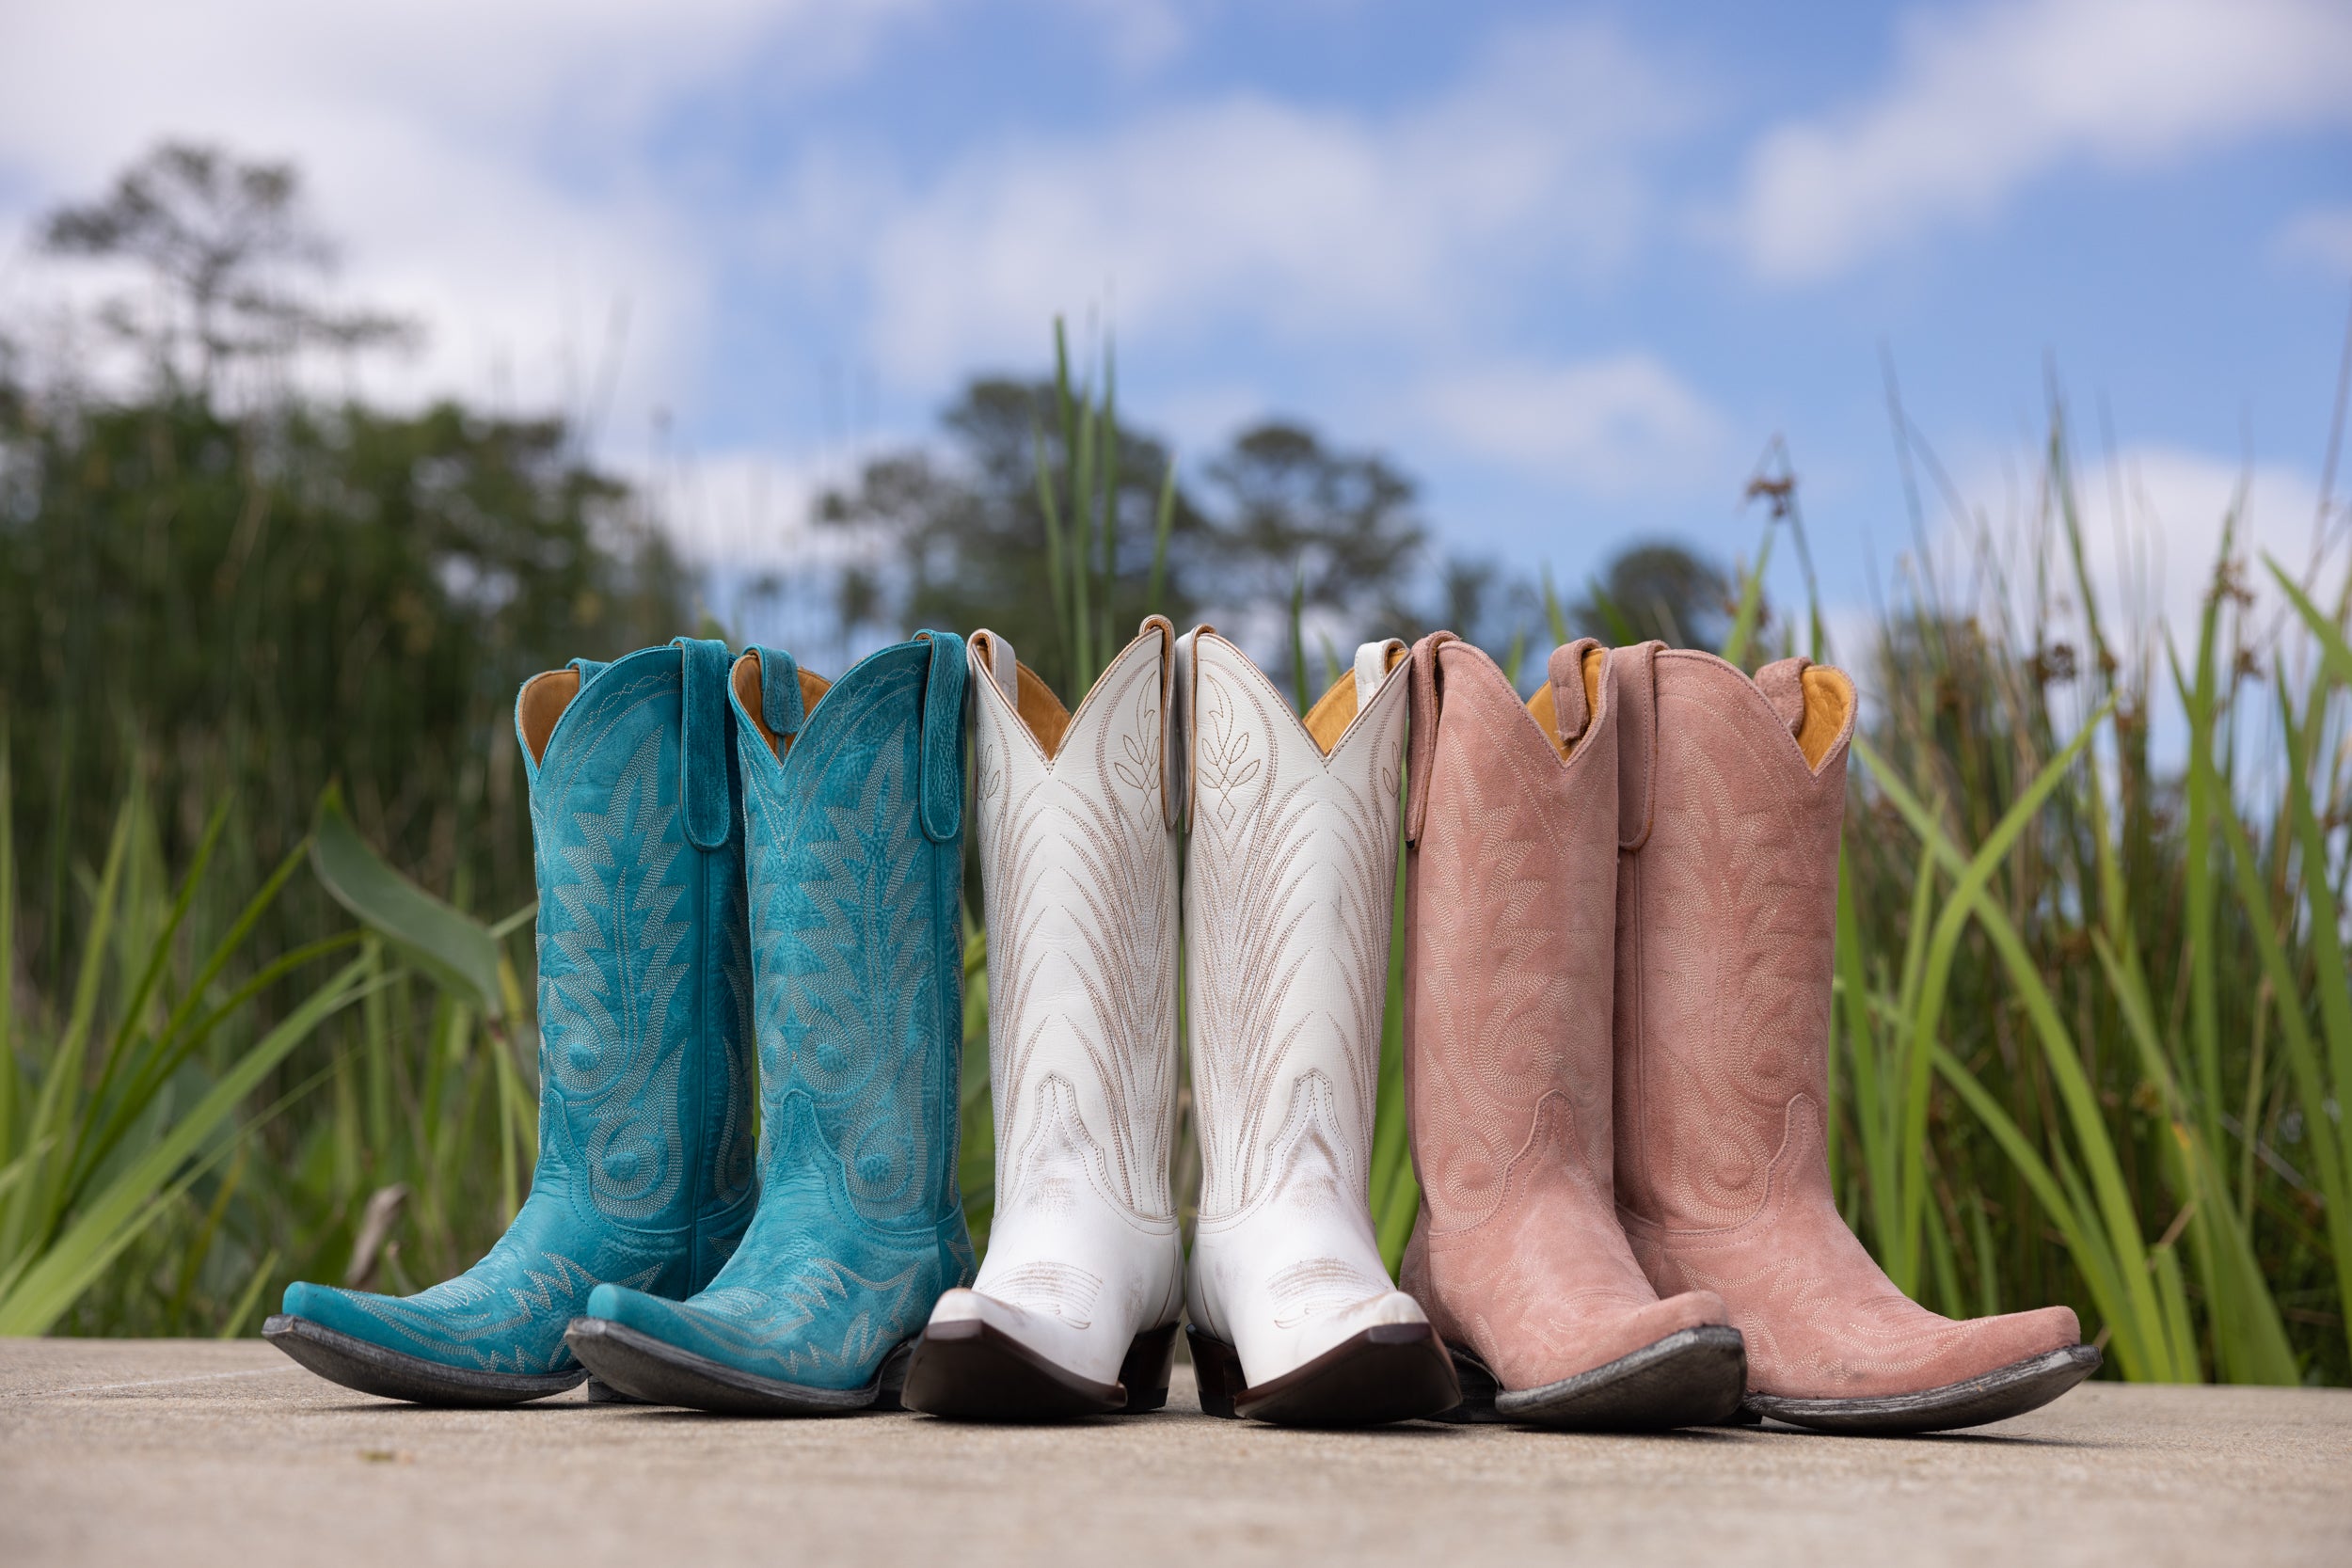 The Best Women's Cowboy Boots for Summer – Pinto Ranch